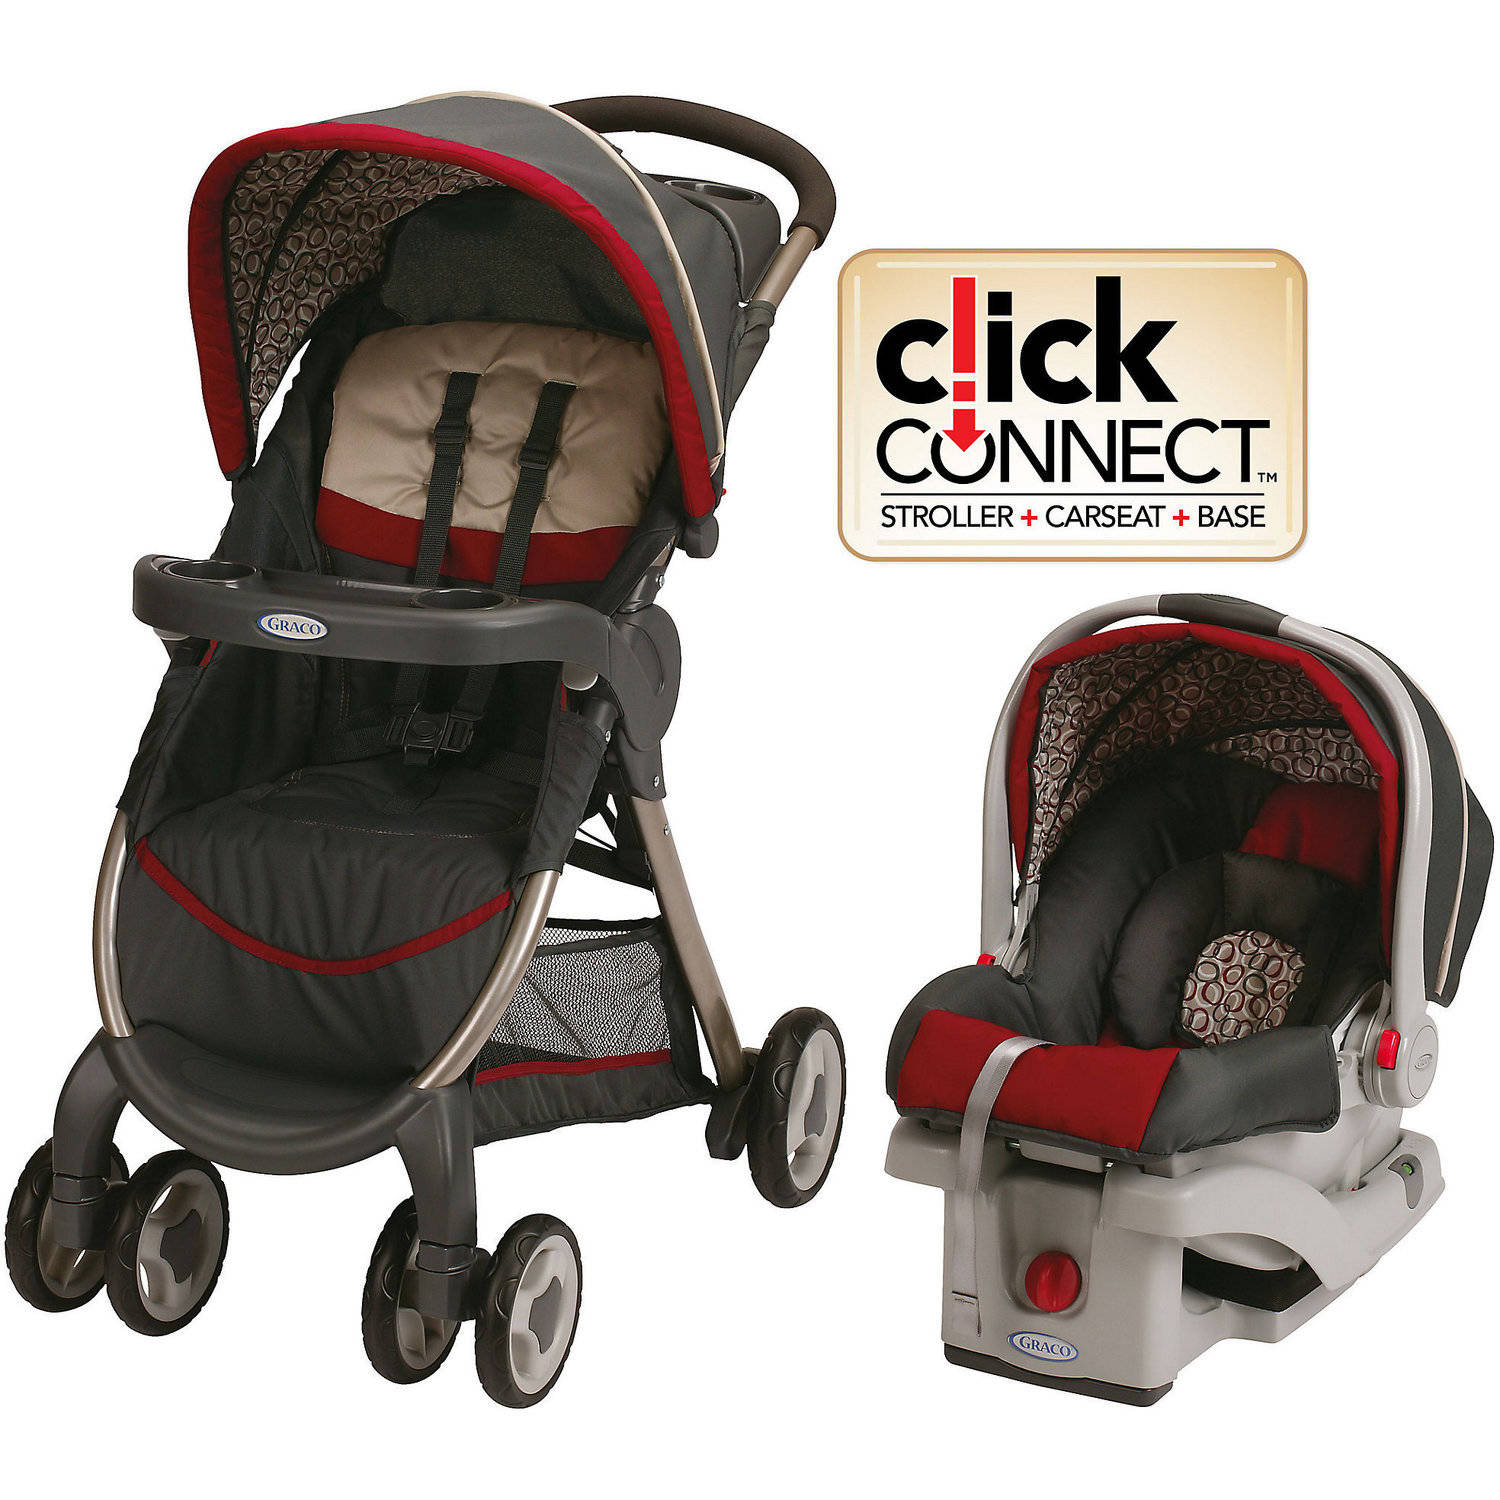 Graco FastAction Fold Click Connect Travel System, Finley - image 5 of 5